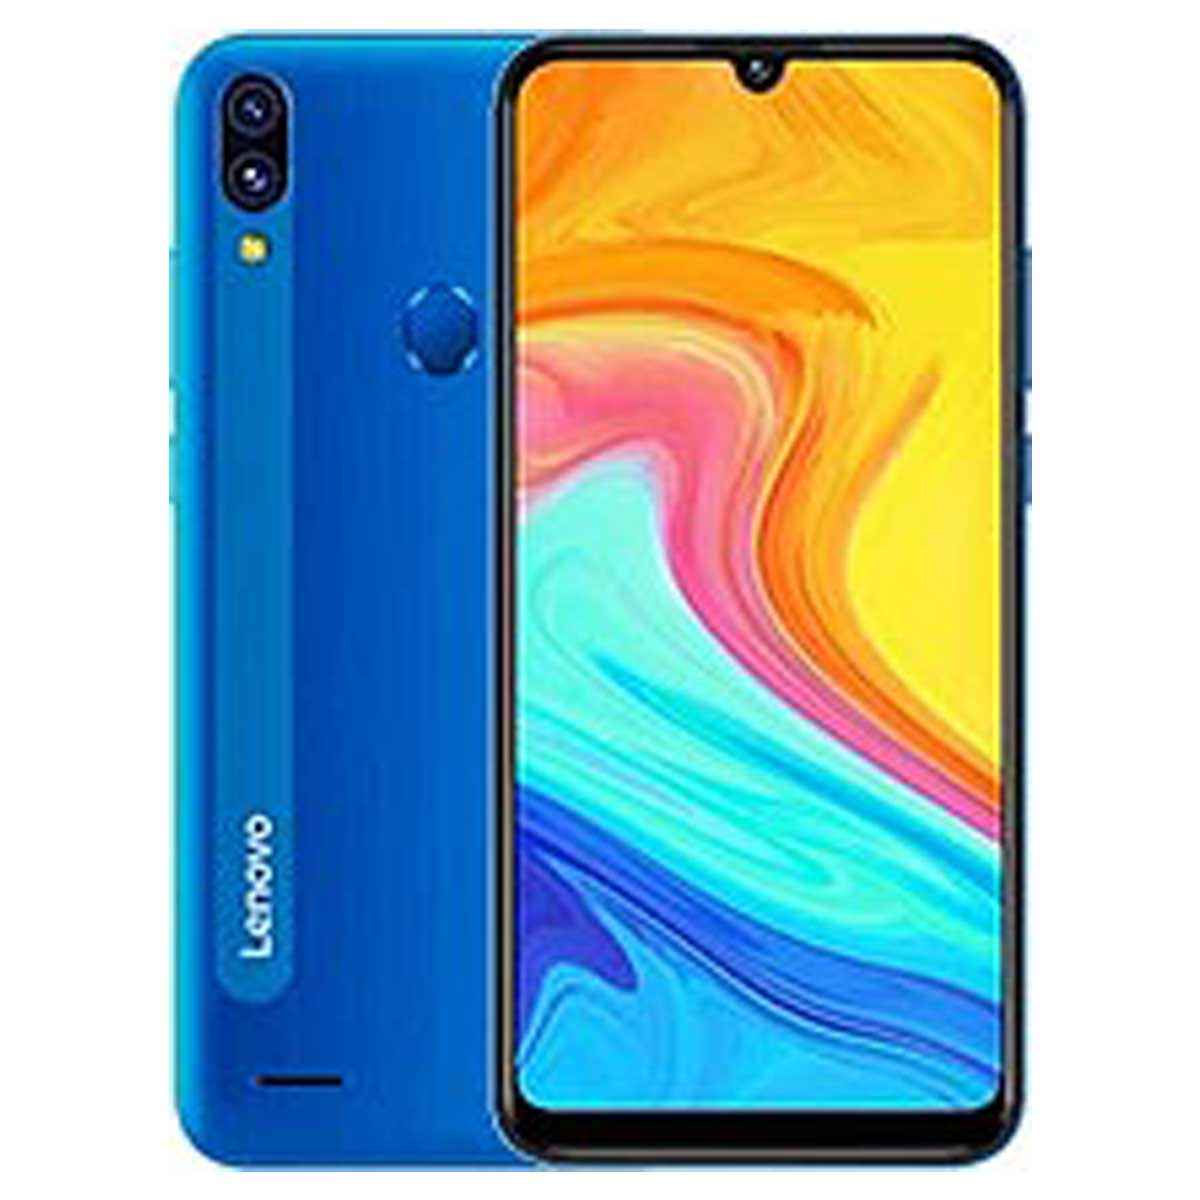 Schipbreuk Negen Handvest Lenovo A7 Price in India, Full Specifications & Features - 6th February  2022 | Digit